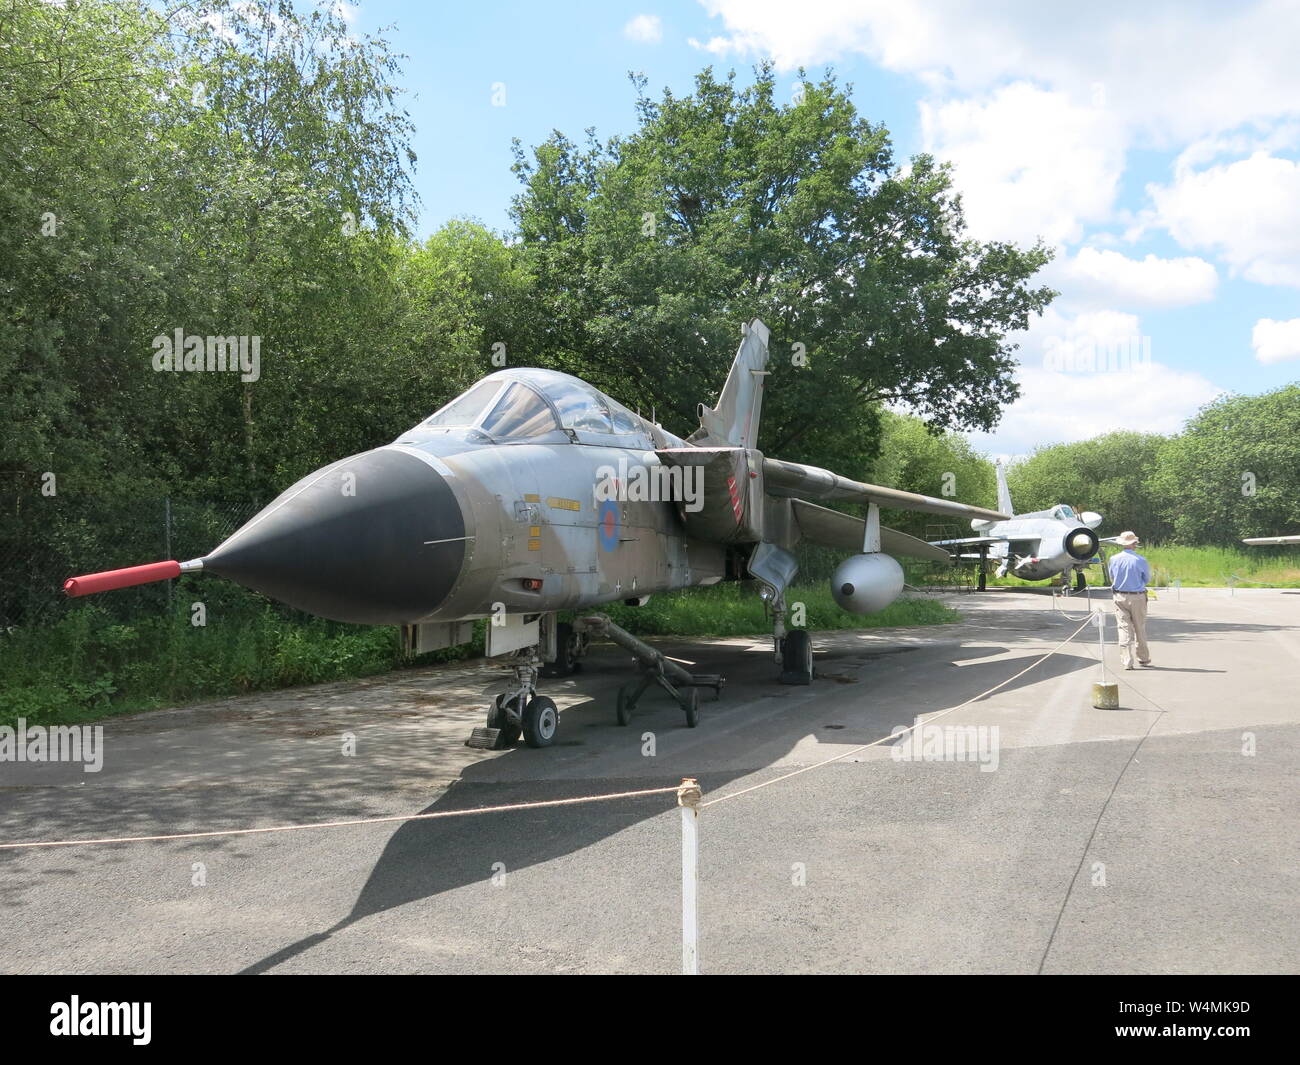 Yorkshire Air Museum has many military aircraft on display, including this Tornado fighter jet that served in the Gulf War. Stock Photo